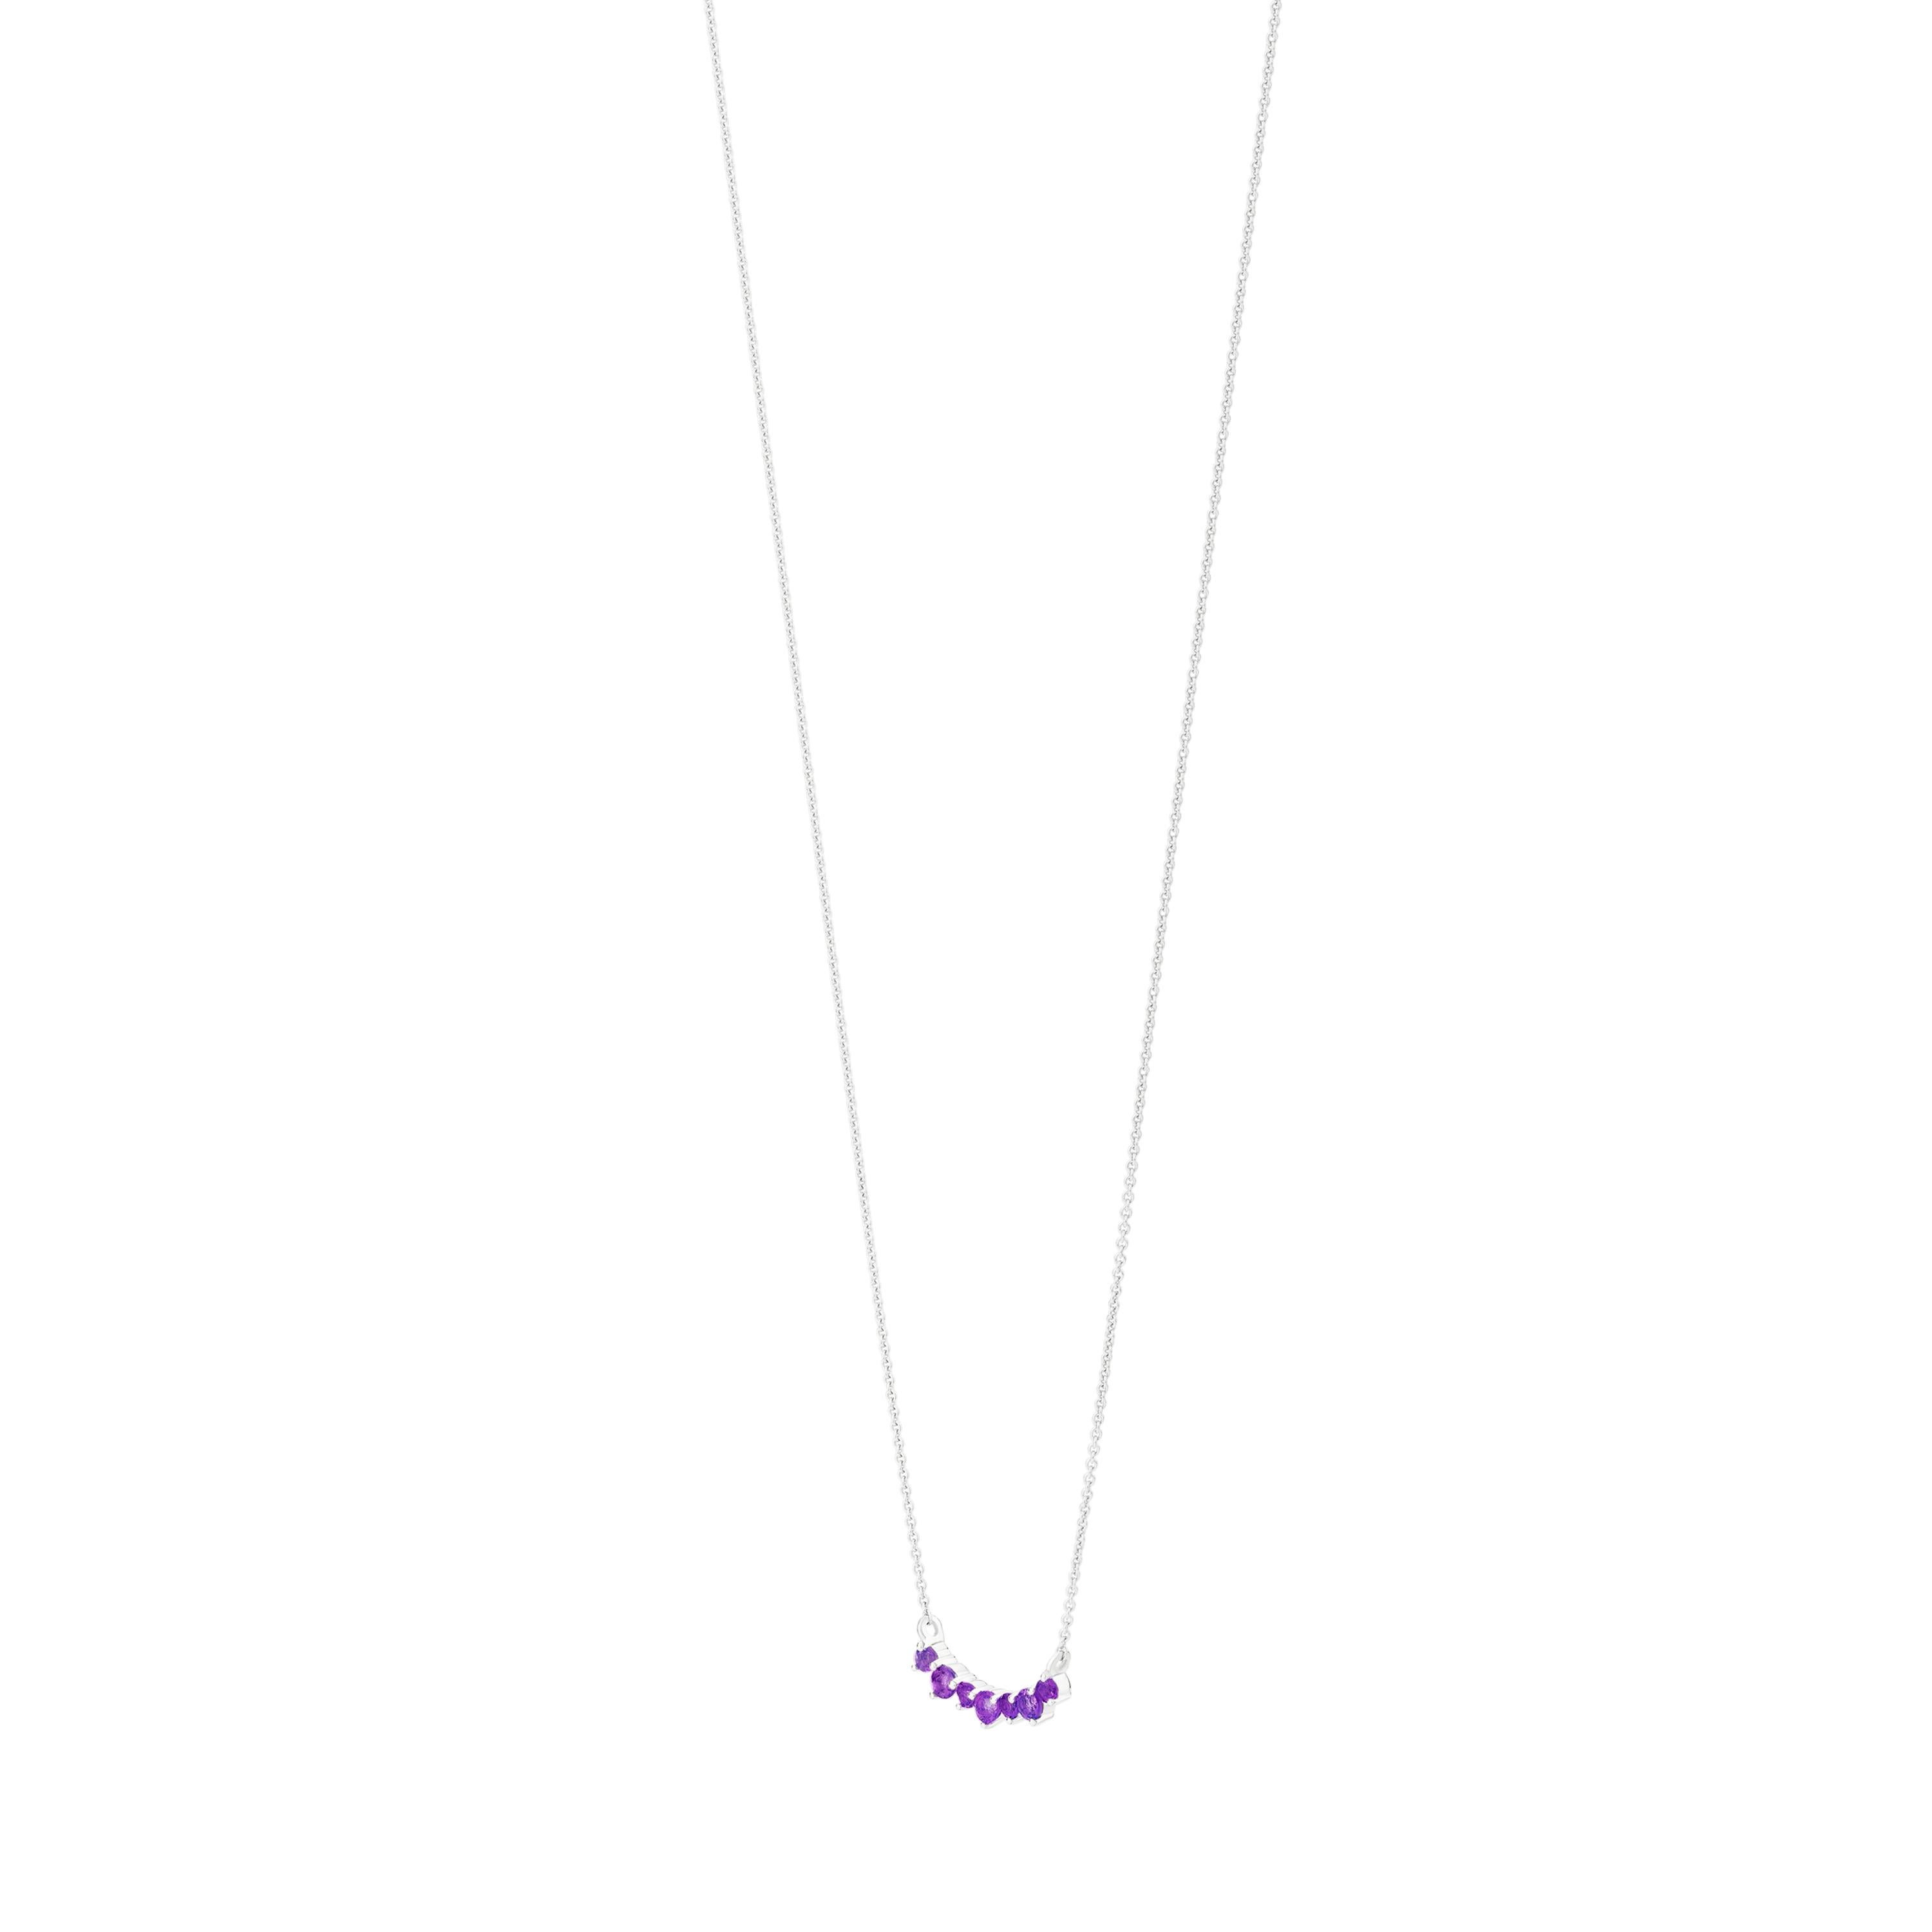 Round Cut GEMISTRY, 0.30cttw. Amethyst Pendant Necklace in 14k White Gold For Sale